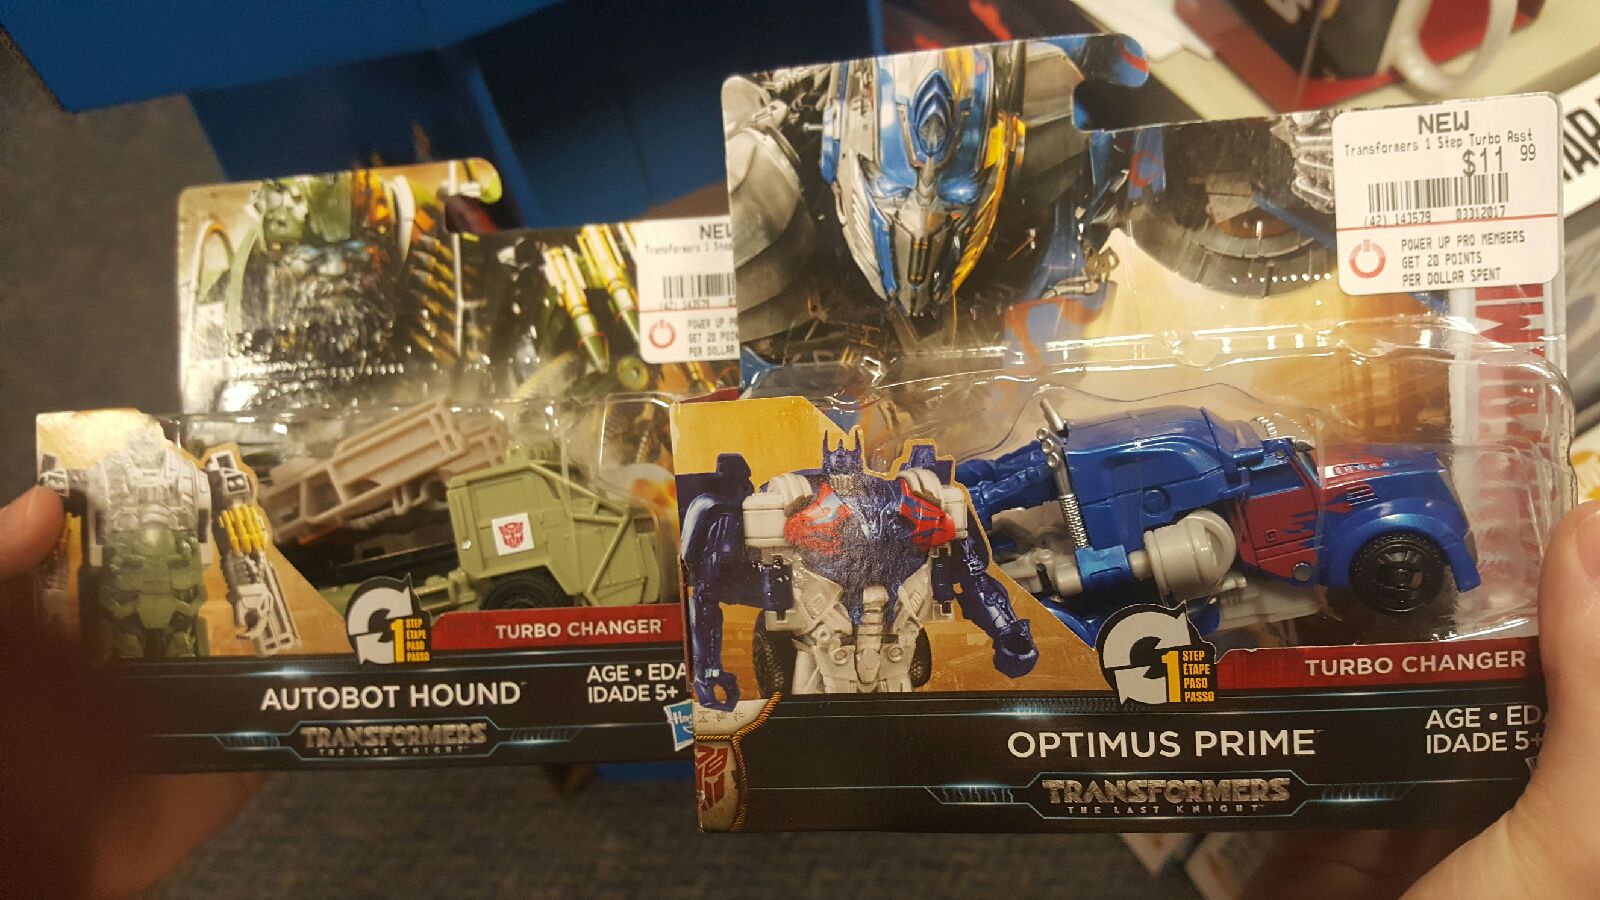 Optimus Prime New Transformers The Last Knight One Step Turbo Changer Choose 